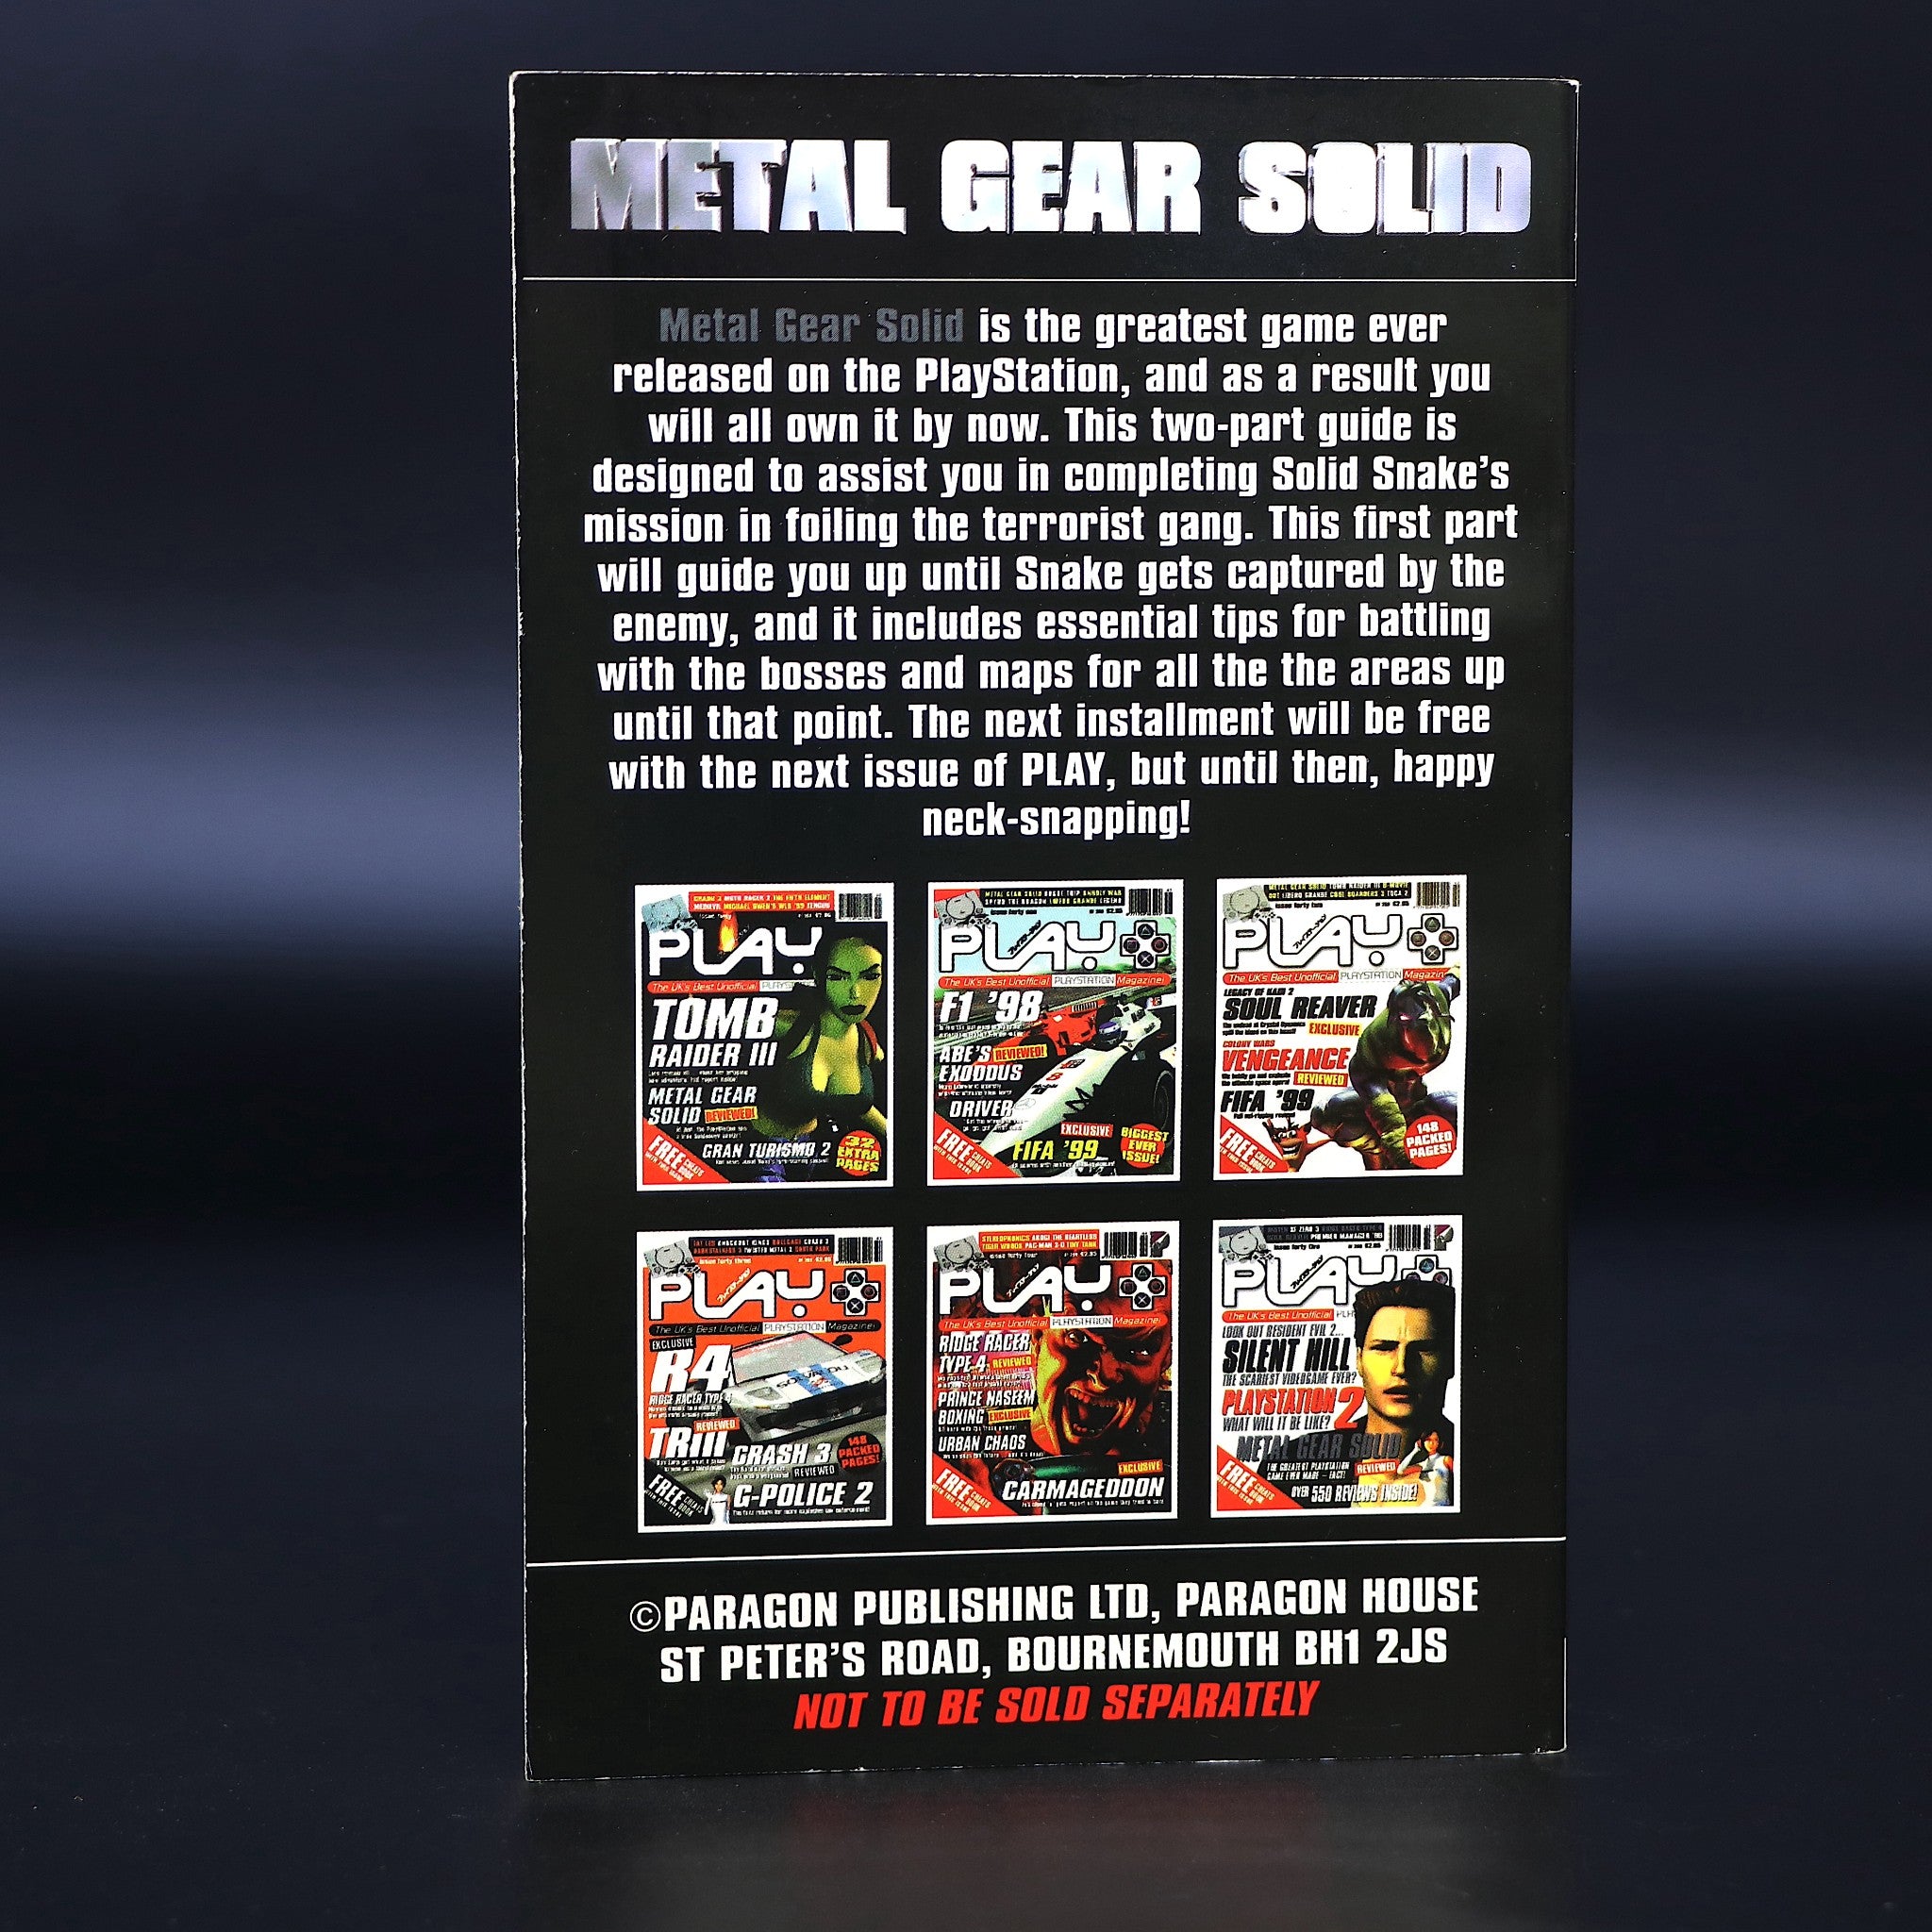 Metal Gear Solid Play Magazine Solution Walkthrough Mini Guide For PS1 Game